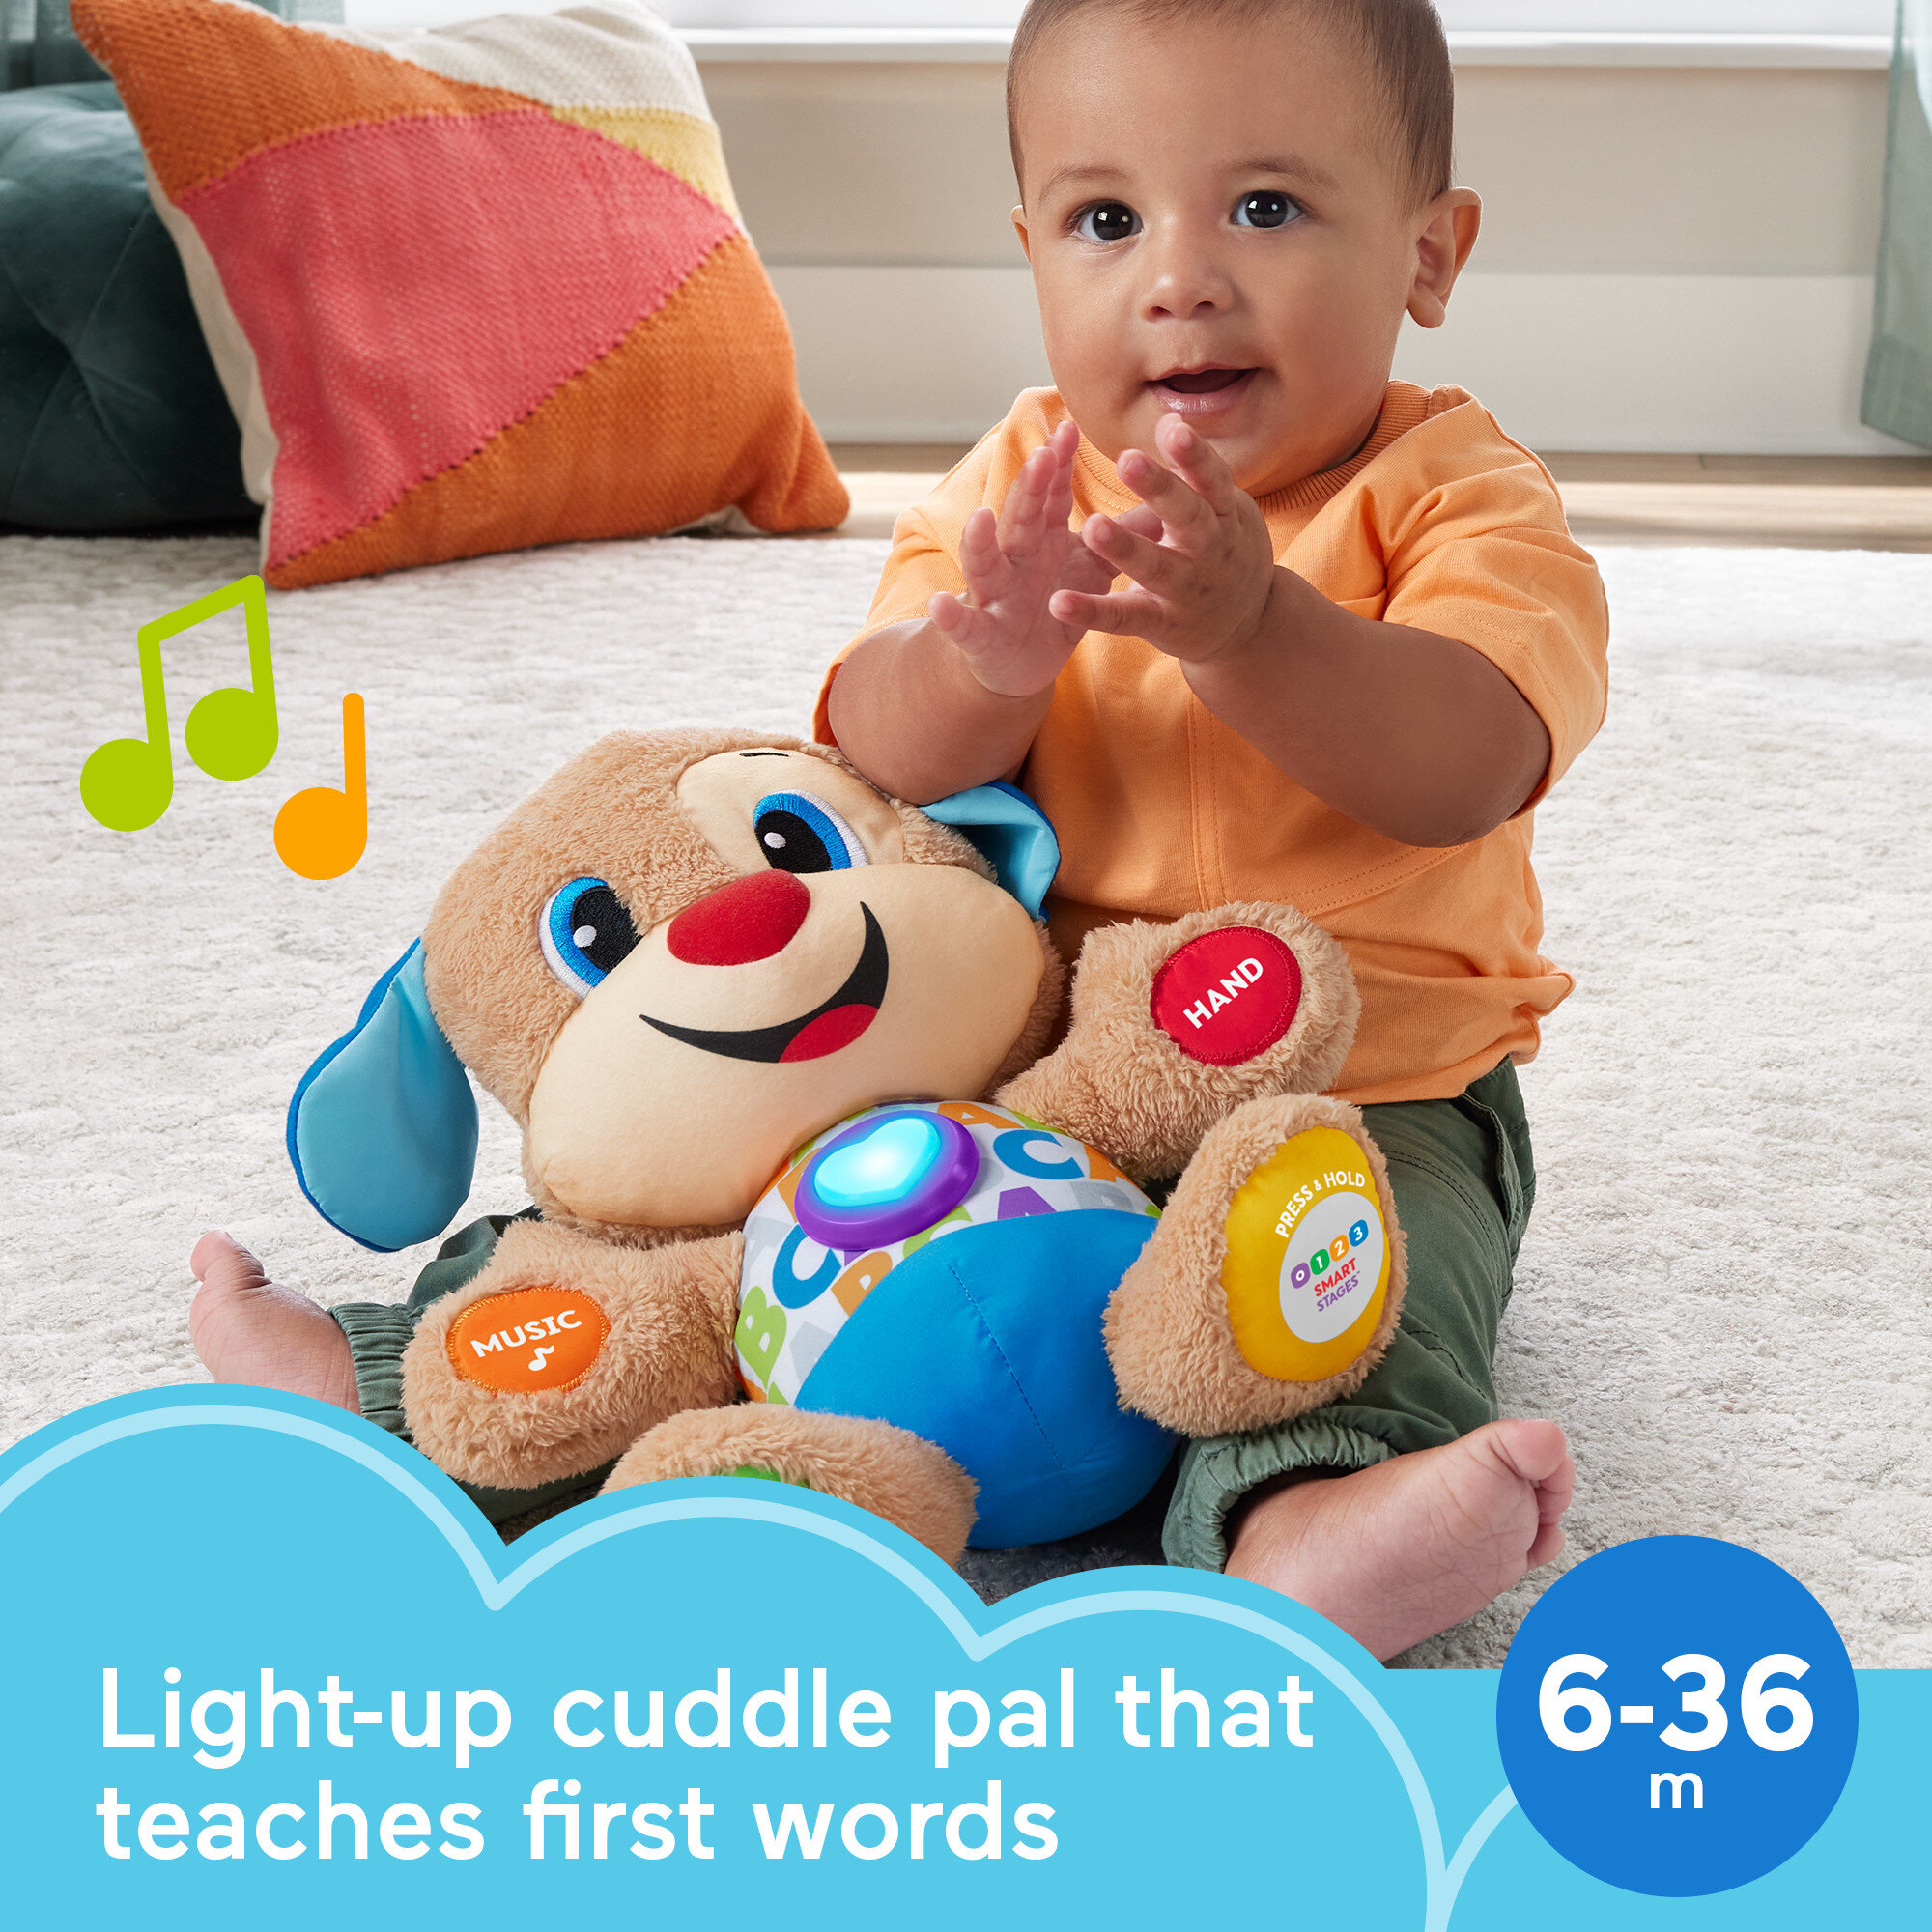 Fisher-Price Laugh & Learn Smart Stages Puppy Plush Learning Toy for Baby, Infants and Toddlers - image 3 of 8